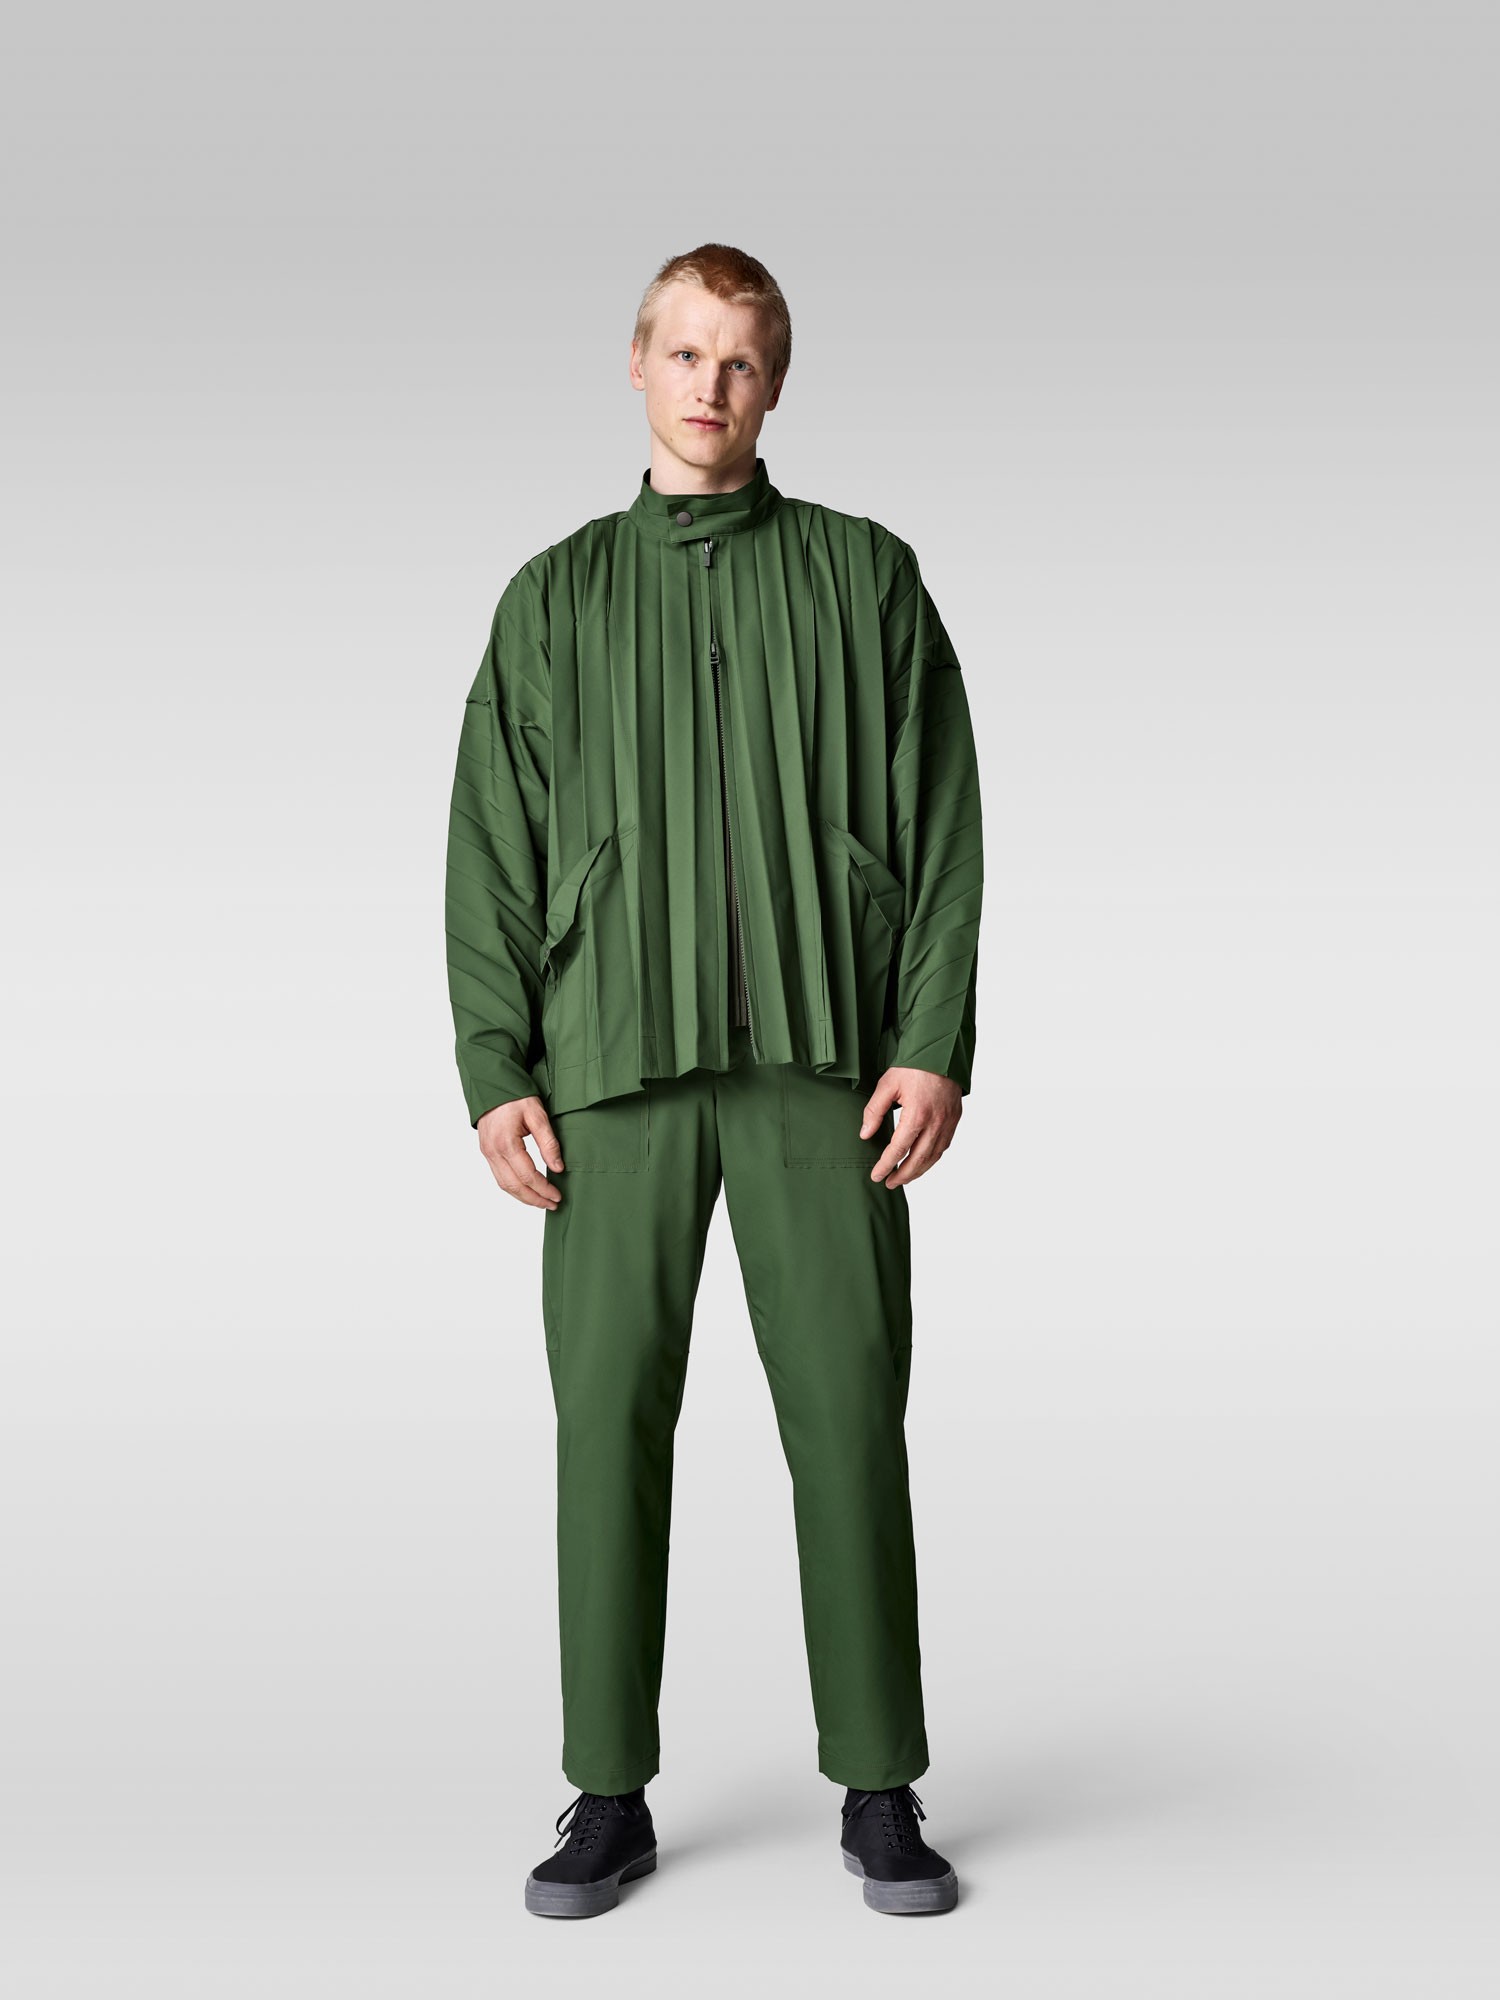 Cozy Up In Tweed Pleats With Homme Plissé Issey Miyake FW21/22